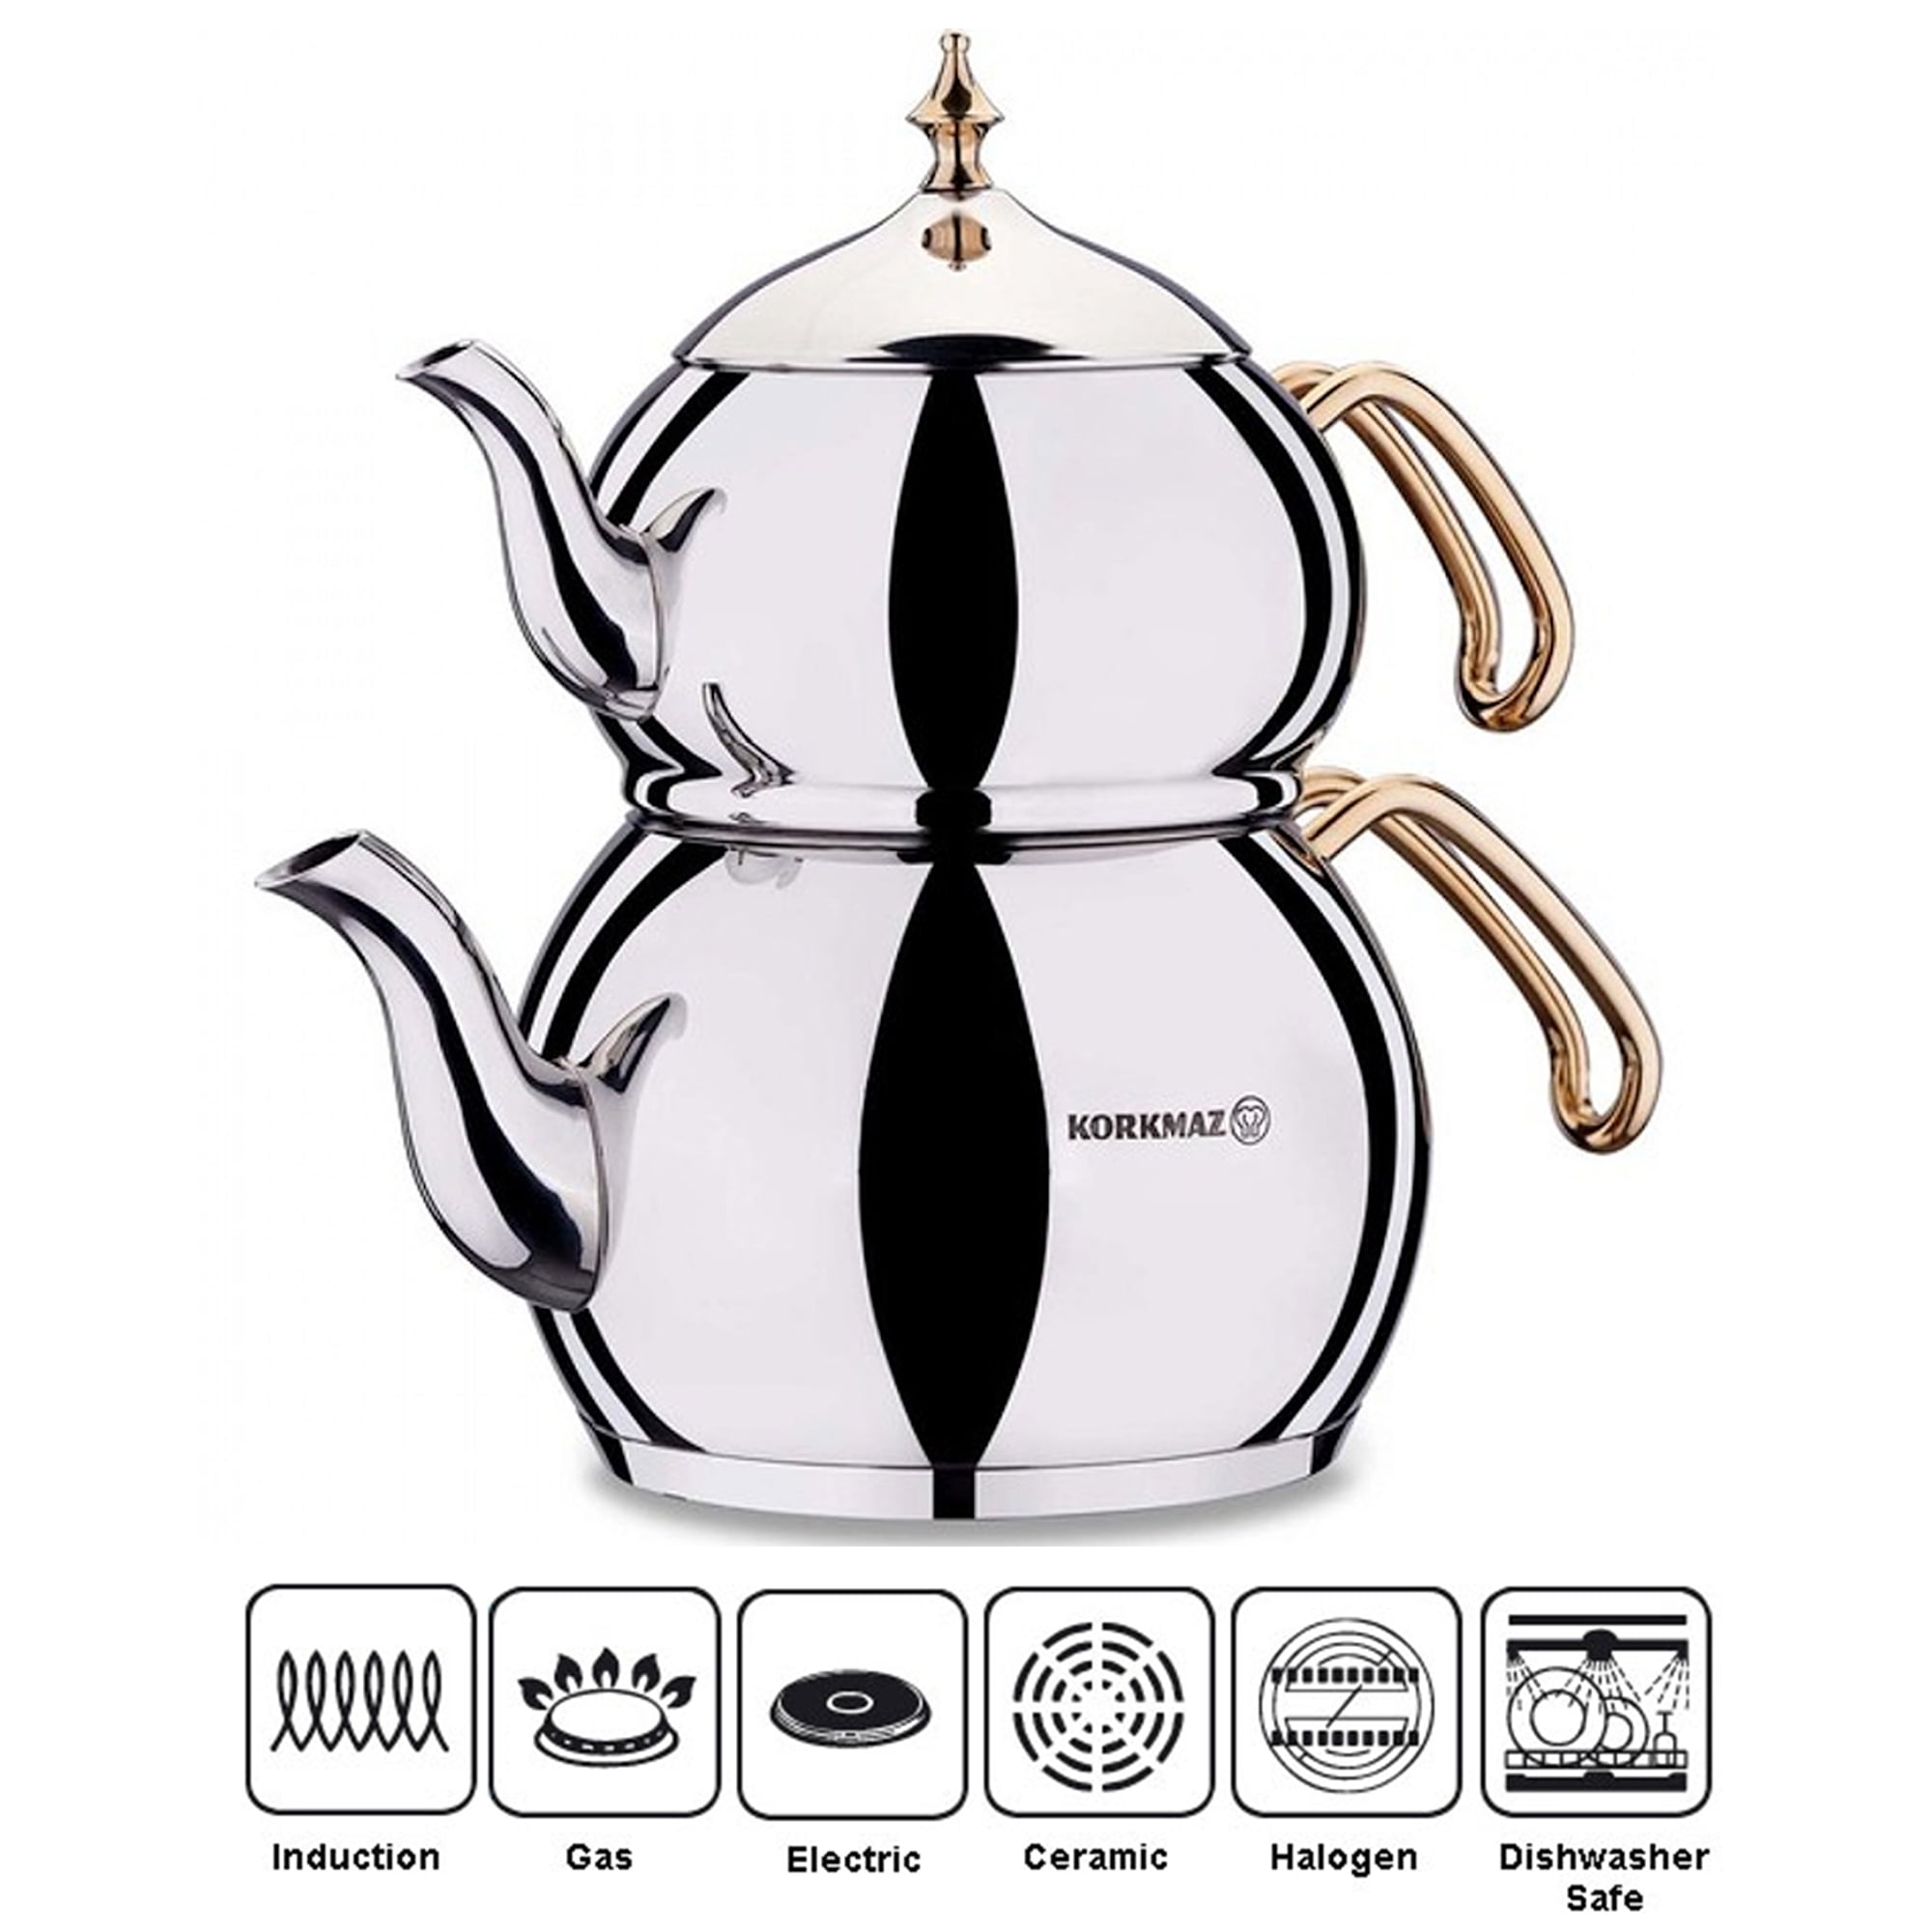 Korkmaz A222-01 Hanedan Gold Turkish Teapot Set for Stovetop, 18/10  Stainless-steel Double Tea Maker with Gold Handles, Samovar Style Tea  Kettle with